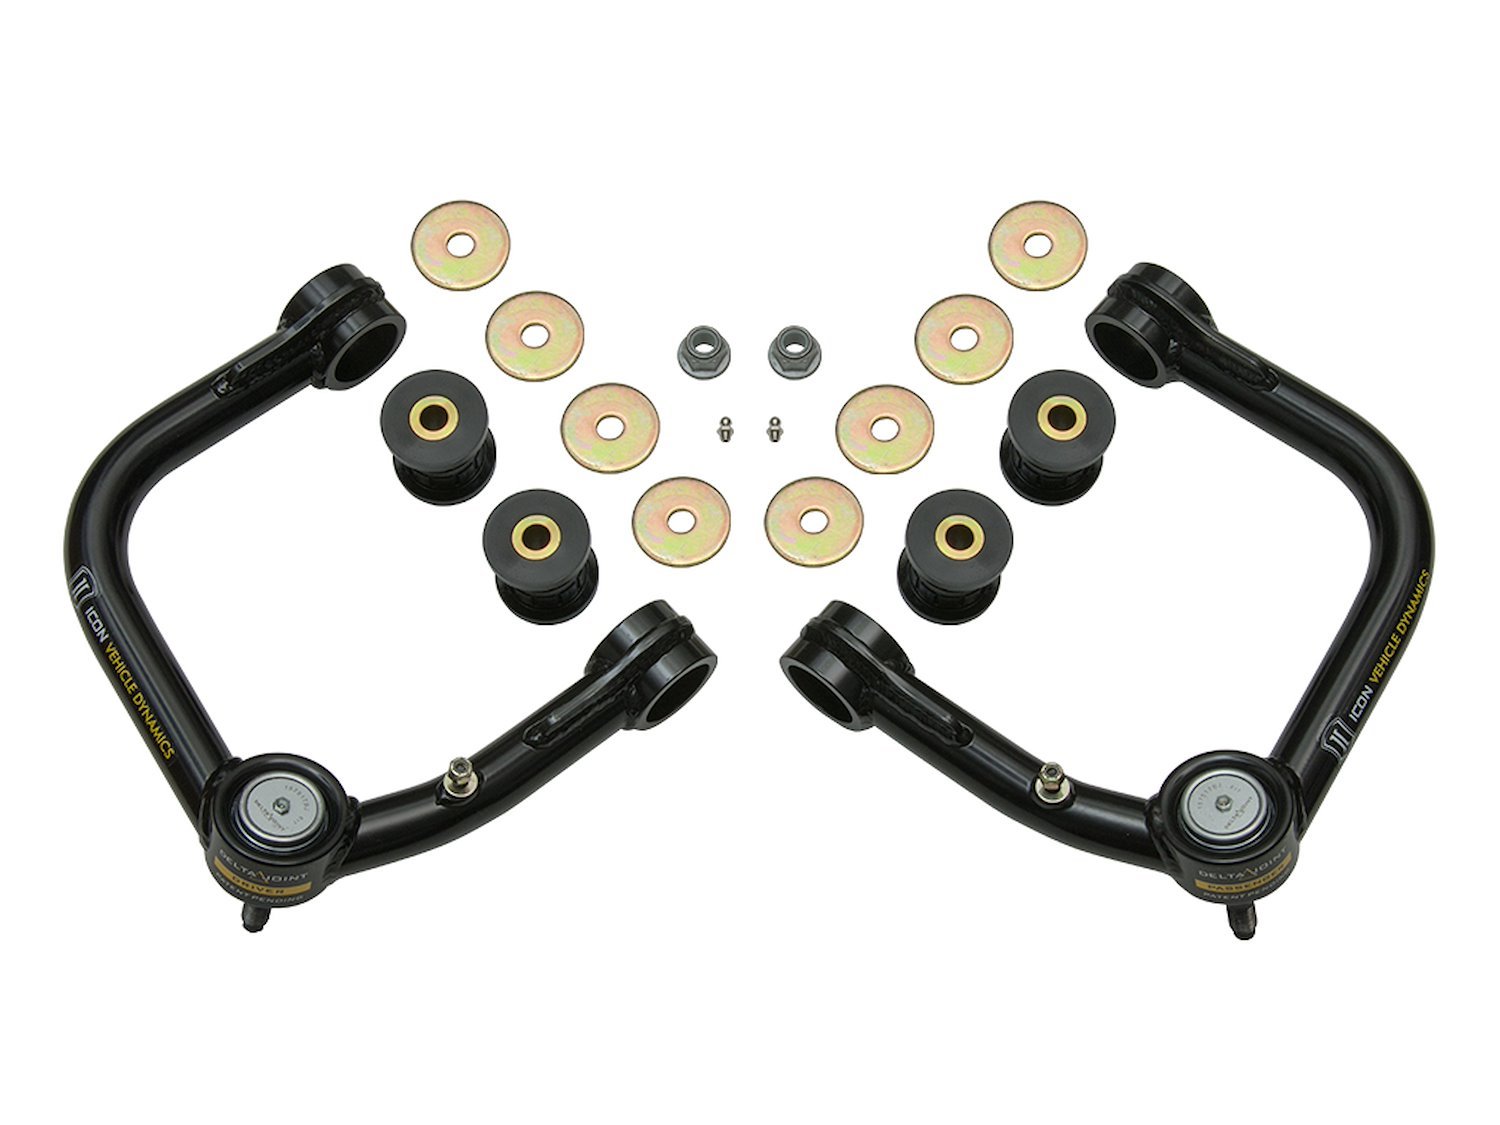 2007-2014 FJ CRUISER/2003-UP 4RUNNER/2003-UP GX470/460 TUBULAR UPPER CONTROL ARM WITH DELTA JOINT KIT